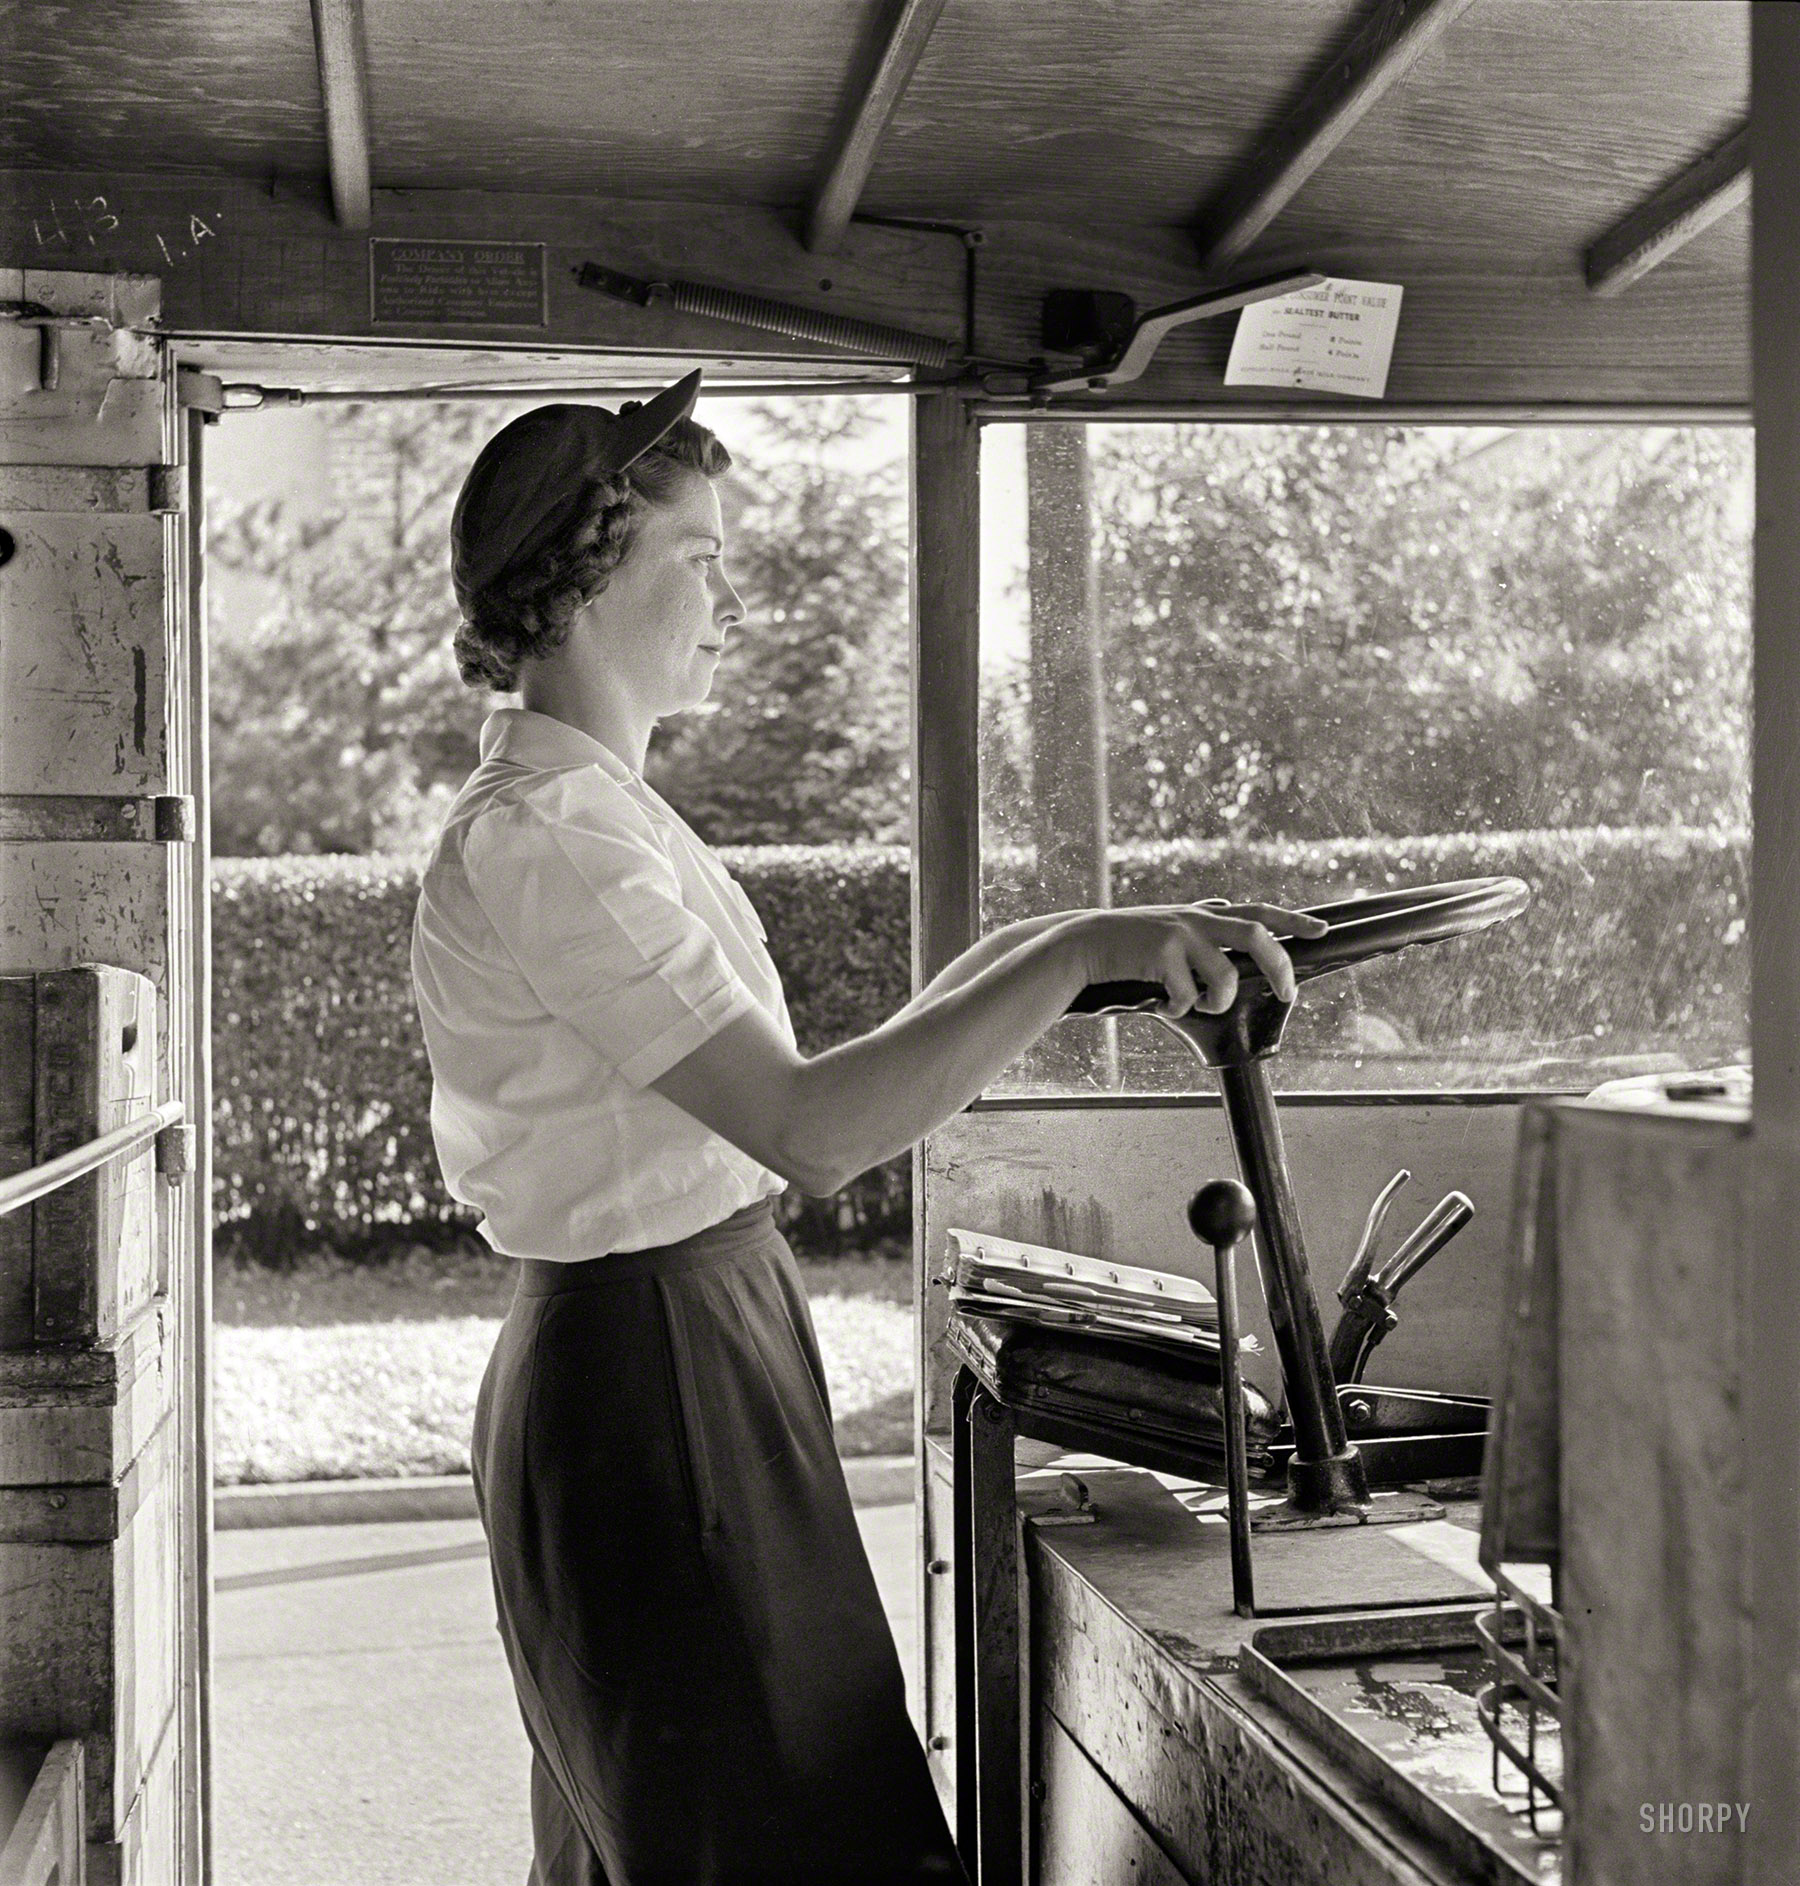 June 1943. Bryn Mawr, Pa. "Mrs. Helen Joyce, one of the many women now working for the Supplee-Wills-Jones Milk Co. She has one child and her husband is a seaman first class in the Navy." Photo by Jack Delano. View full size.